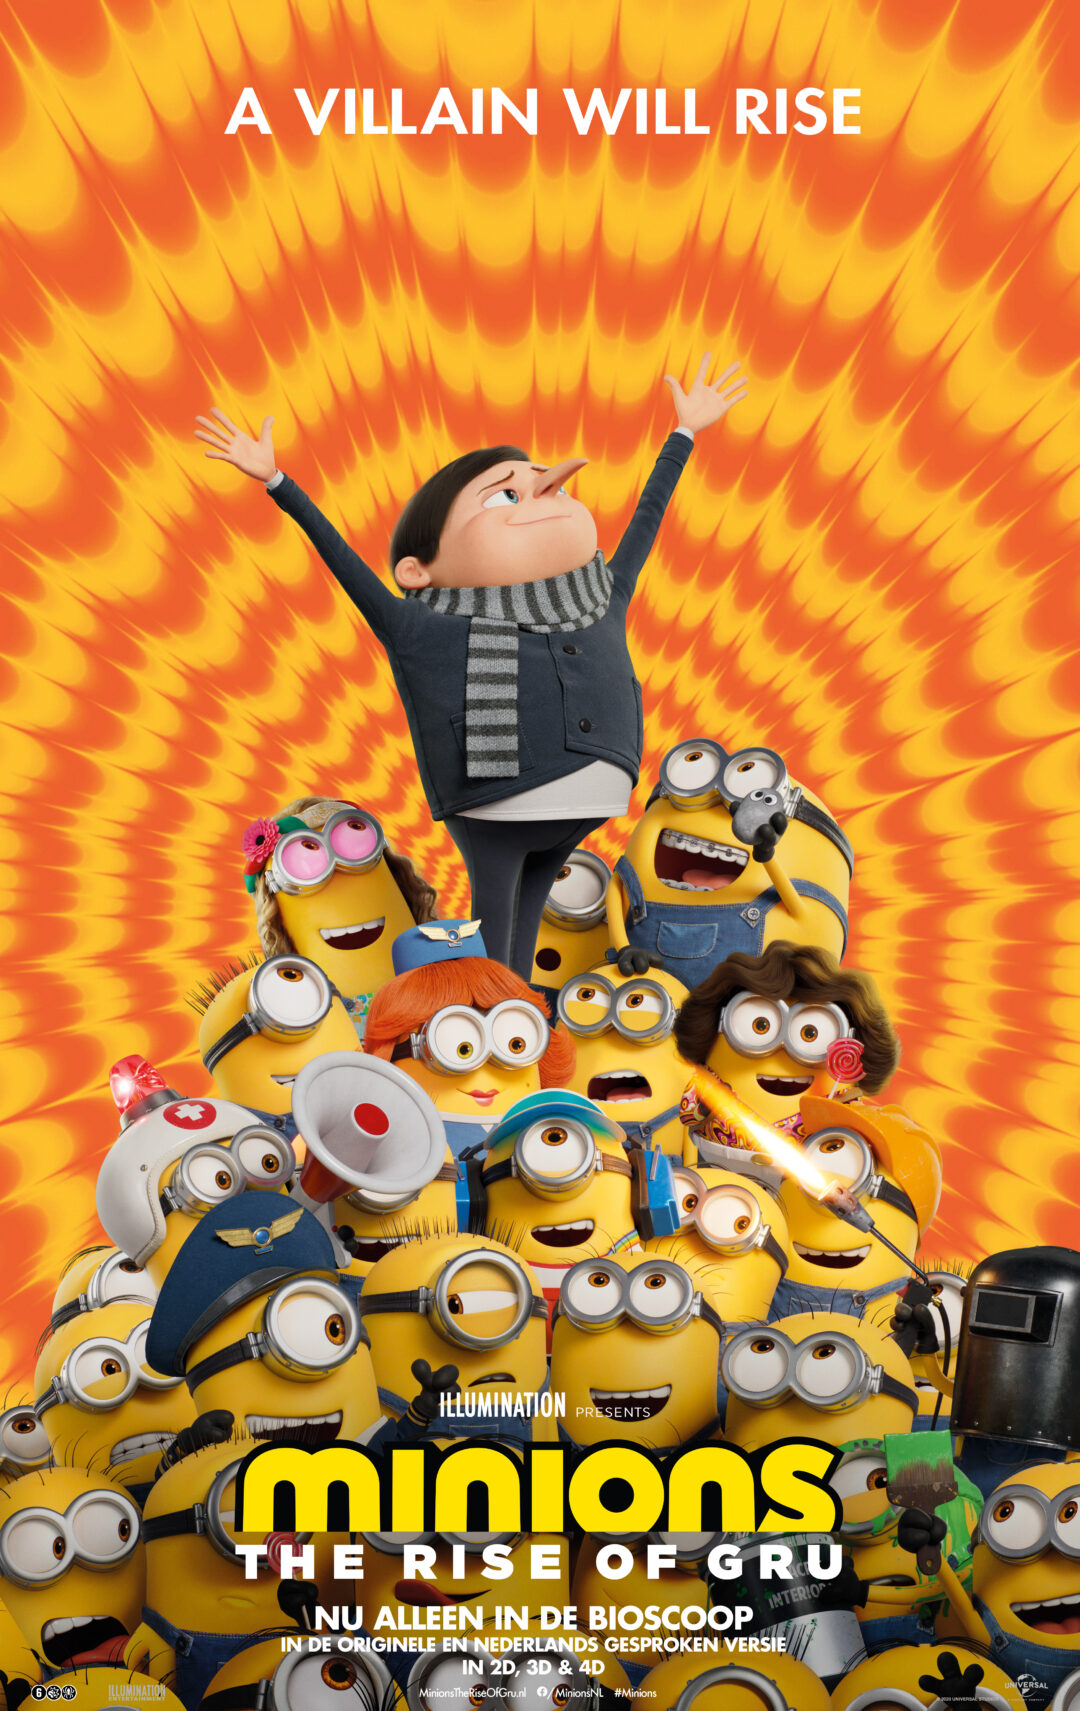 Minions_-The-Rise-of-Gru_ps_1_jpg_sd-high_Copyright-2022-Universal-Pictures-All-Rights-Reserved.jpg